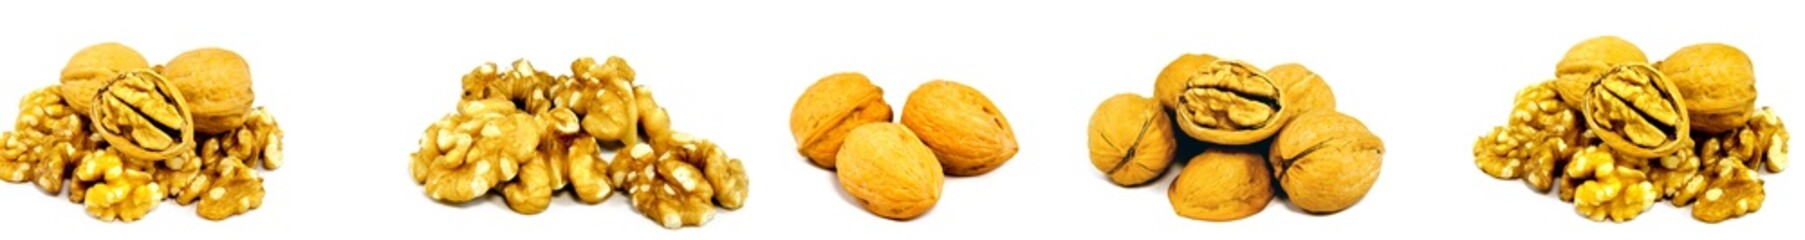 Collage of walnuts on a white background